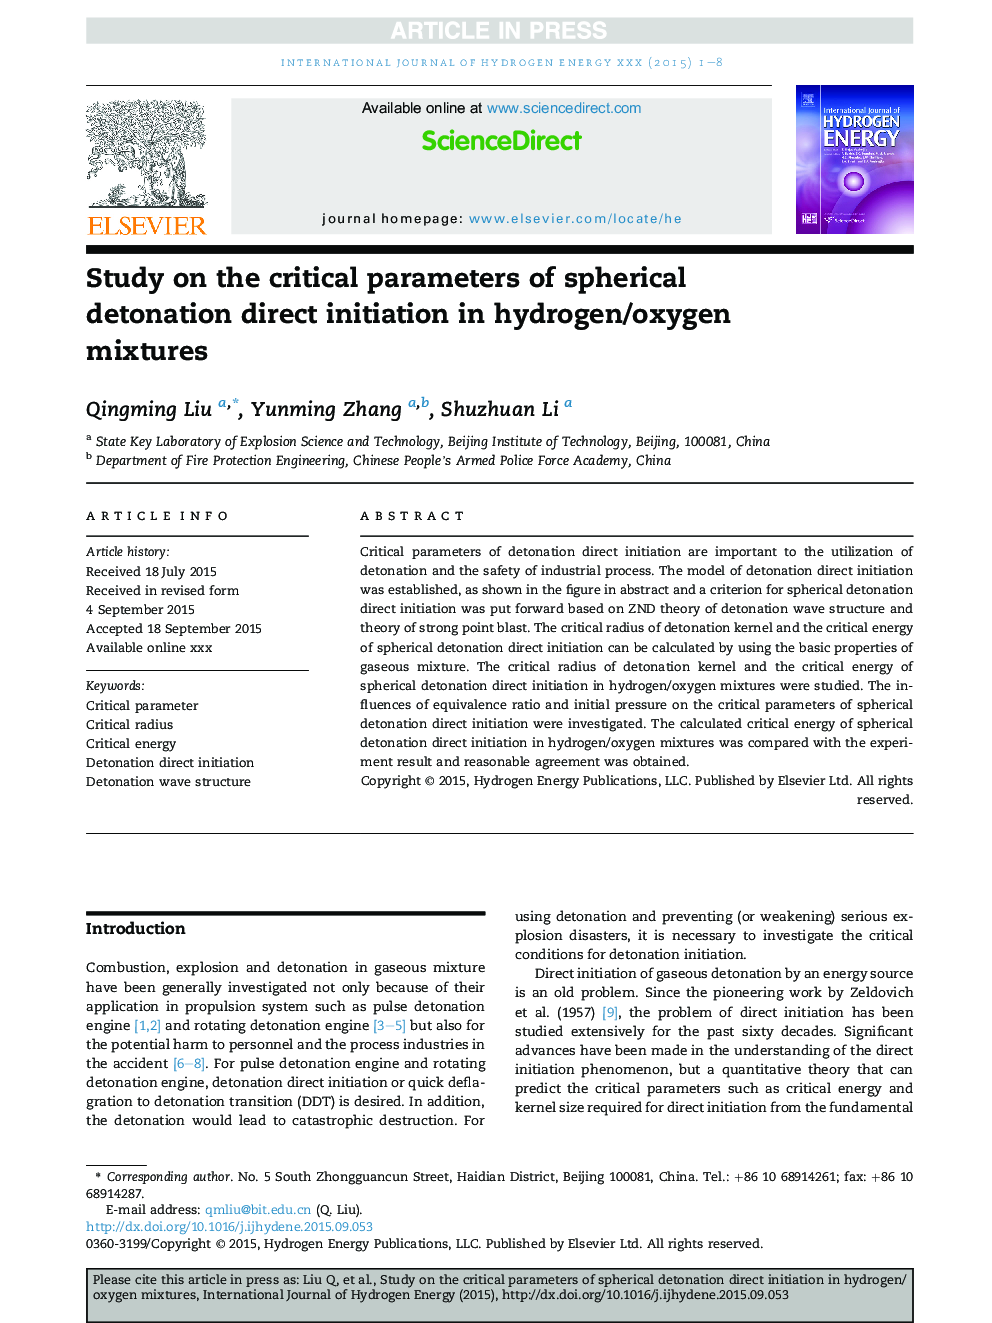 Study on the critical parameters of spherical detonation direct initiation in hydrogen/oxygen mixtures